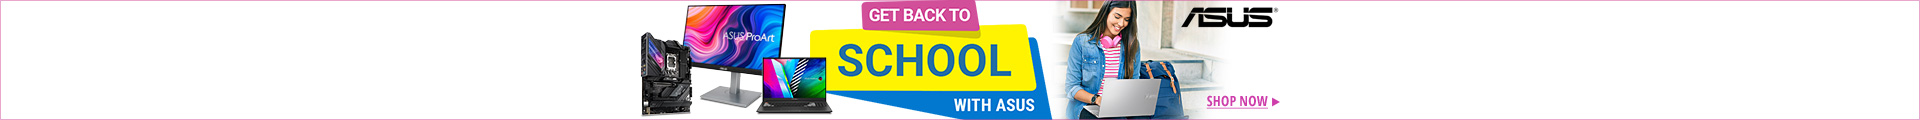 Get Back to School with ASUS